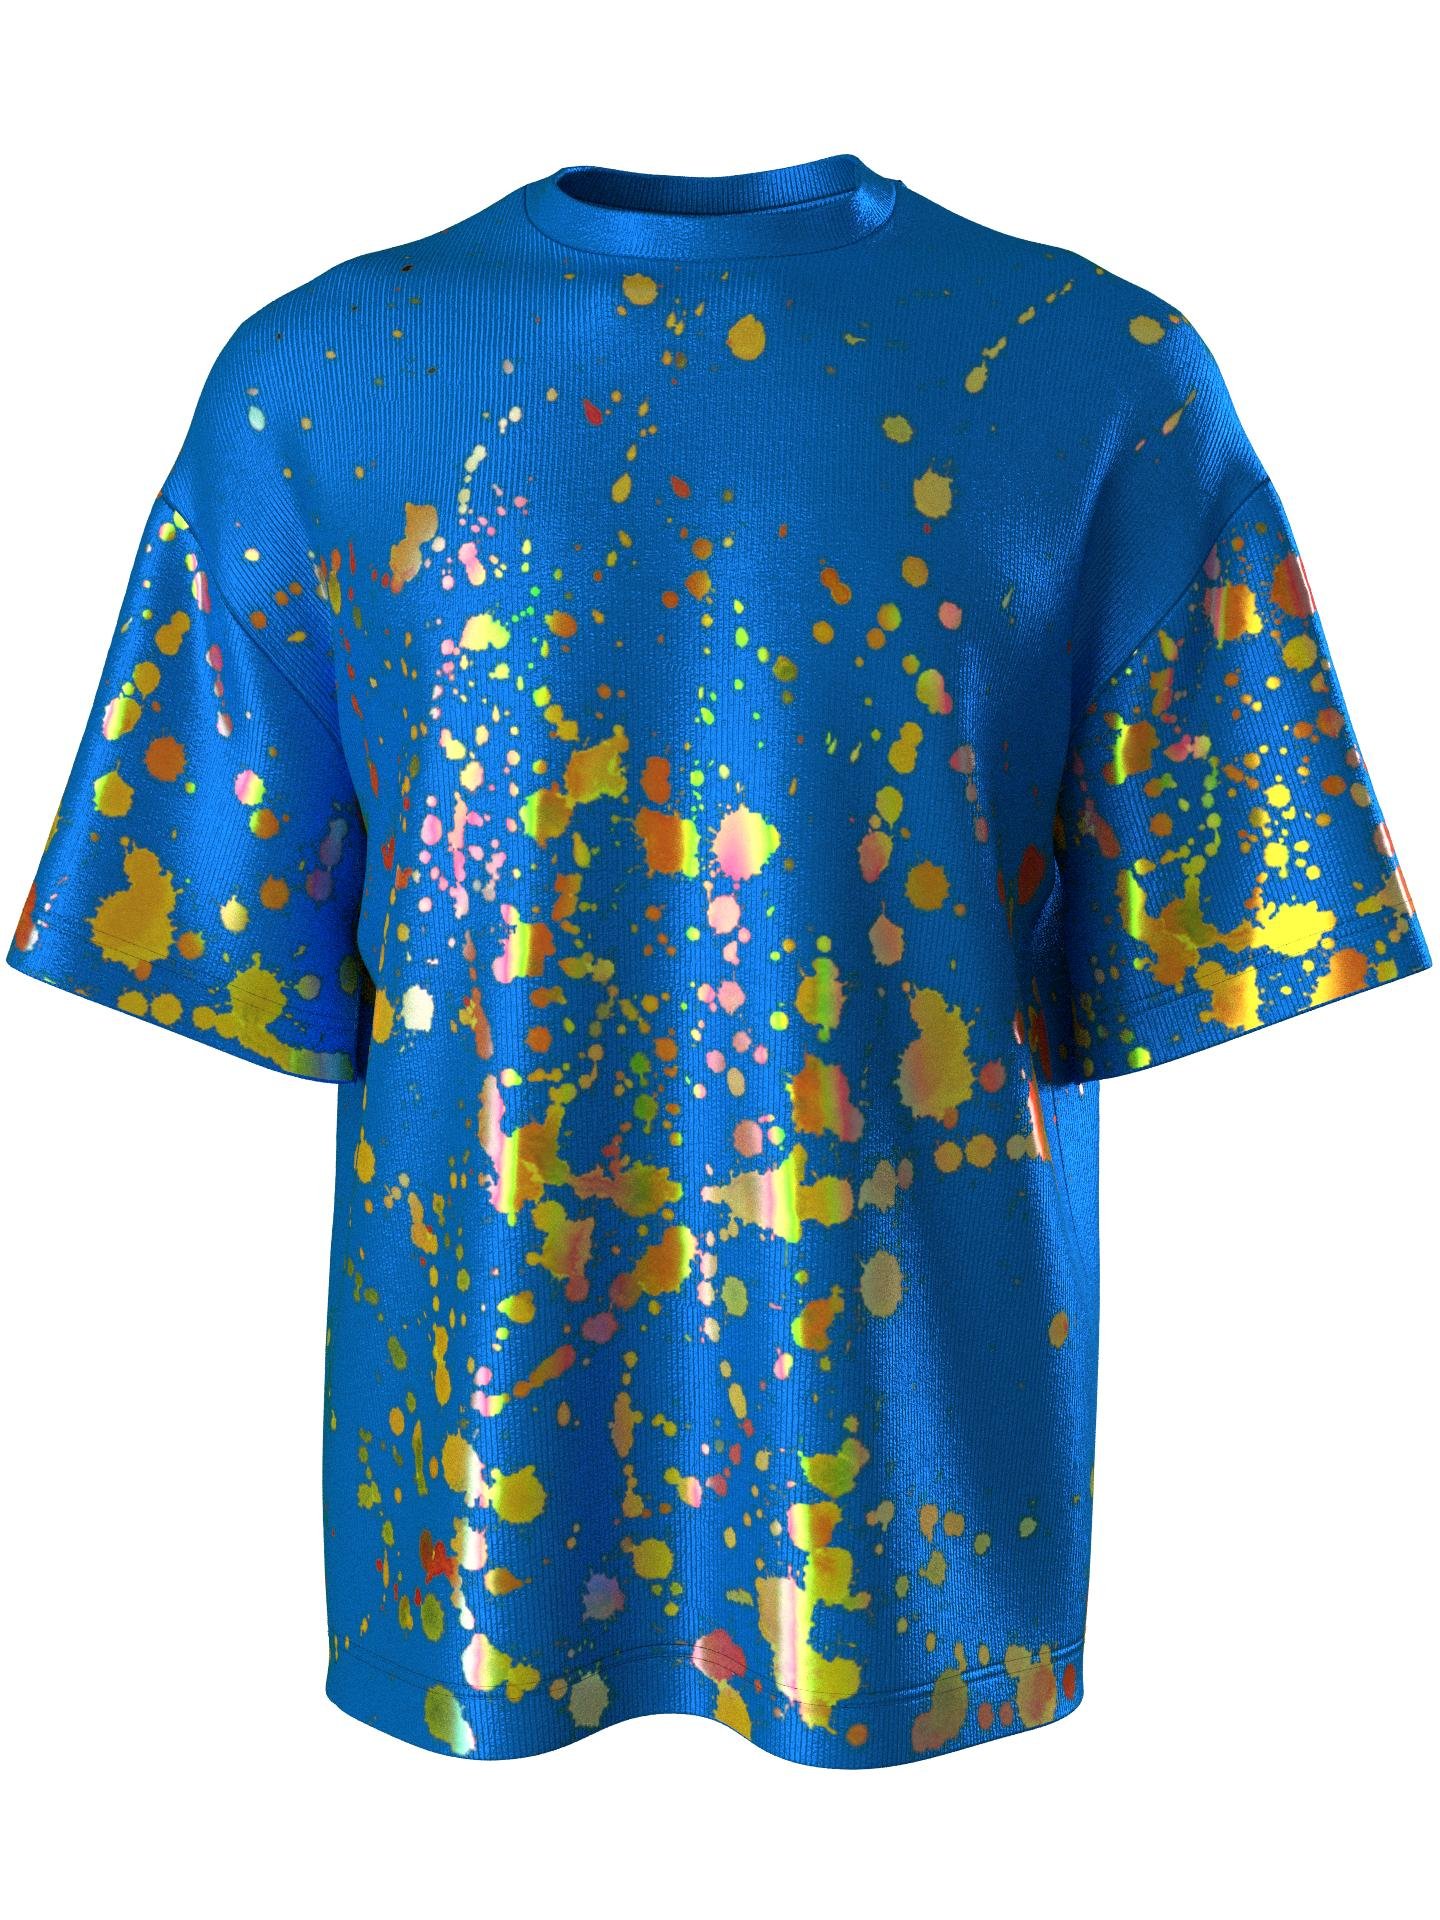 T-shirt with color splash blue by SDGS INSPIRED COLLECTION